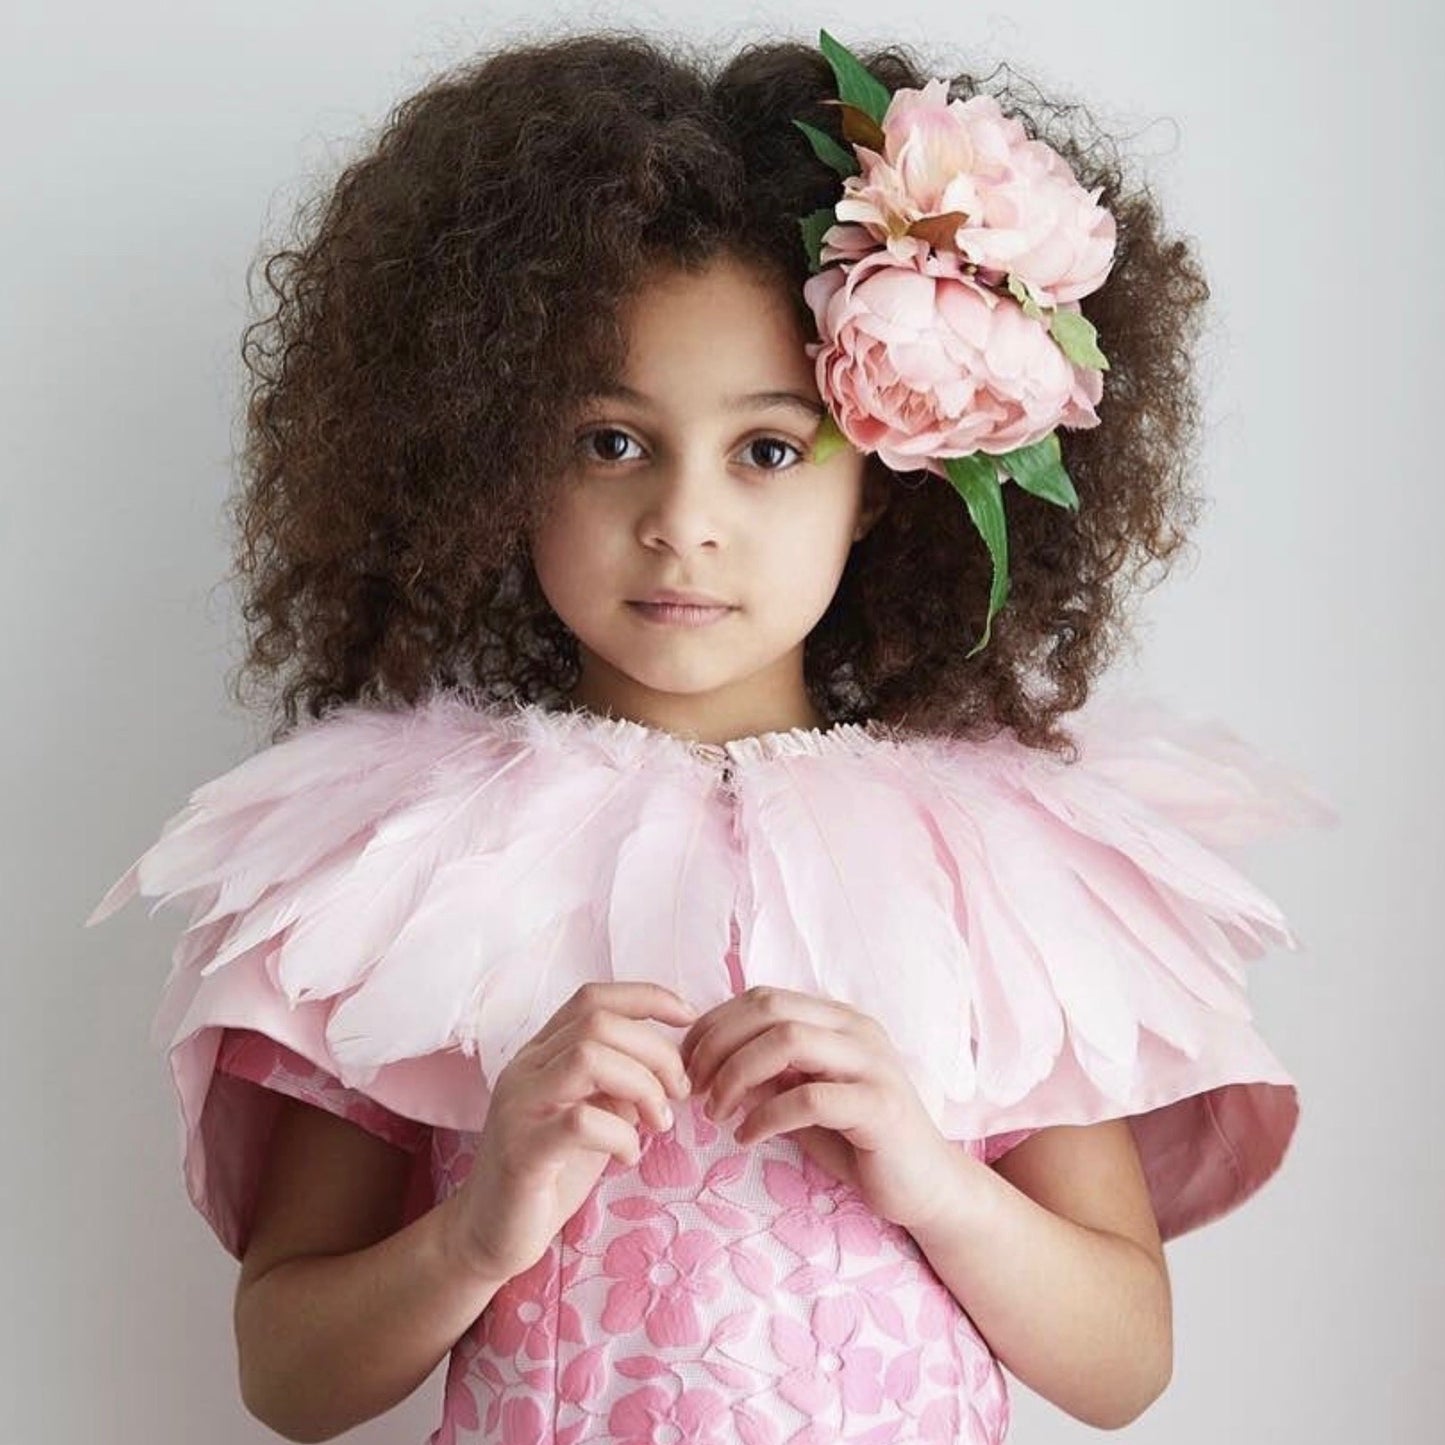 Girl wearing a pink floral brocade dress, pink feather cape, and large pink peonies in her brown curly hair